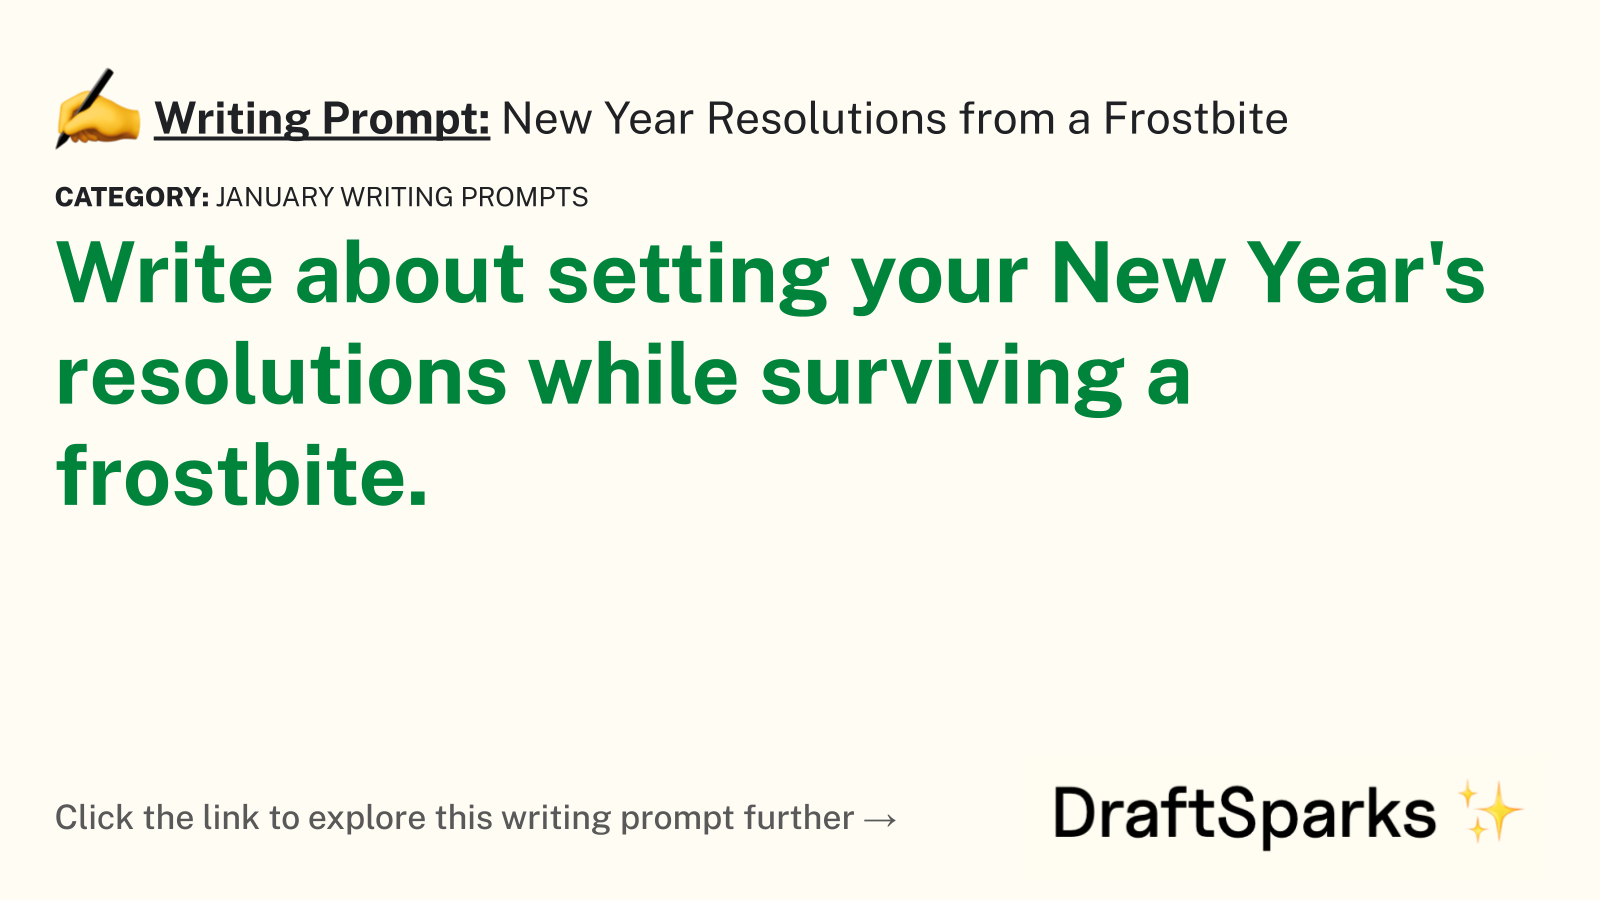 New Year Resolutions from a Frostbite